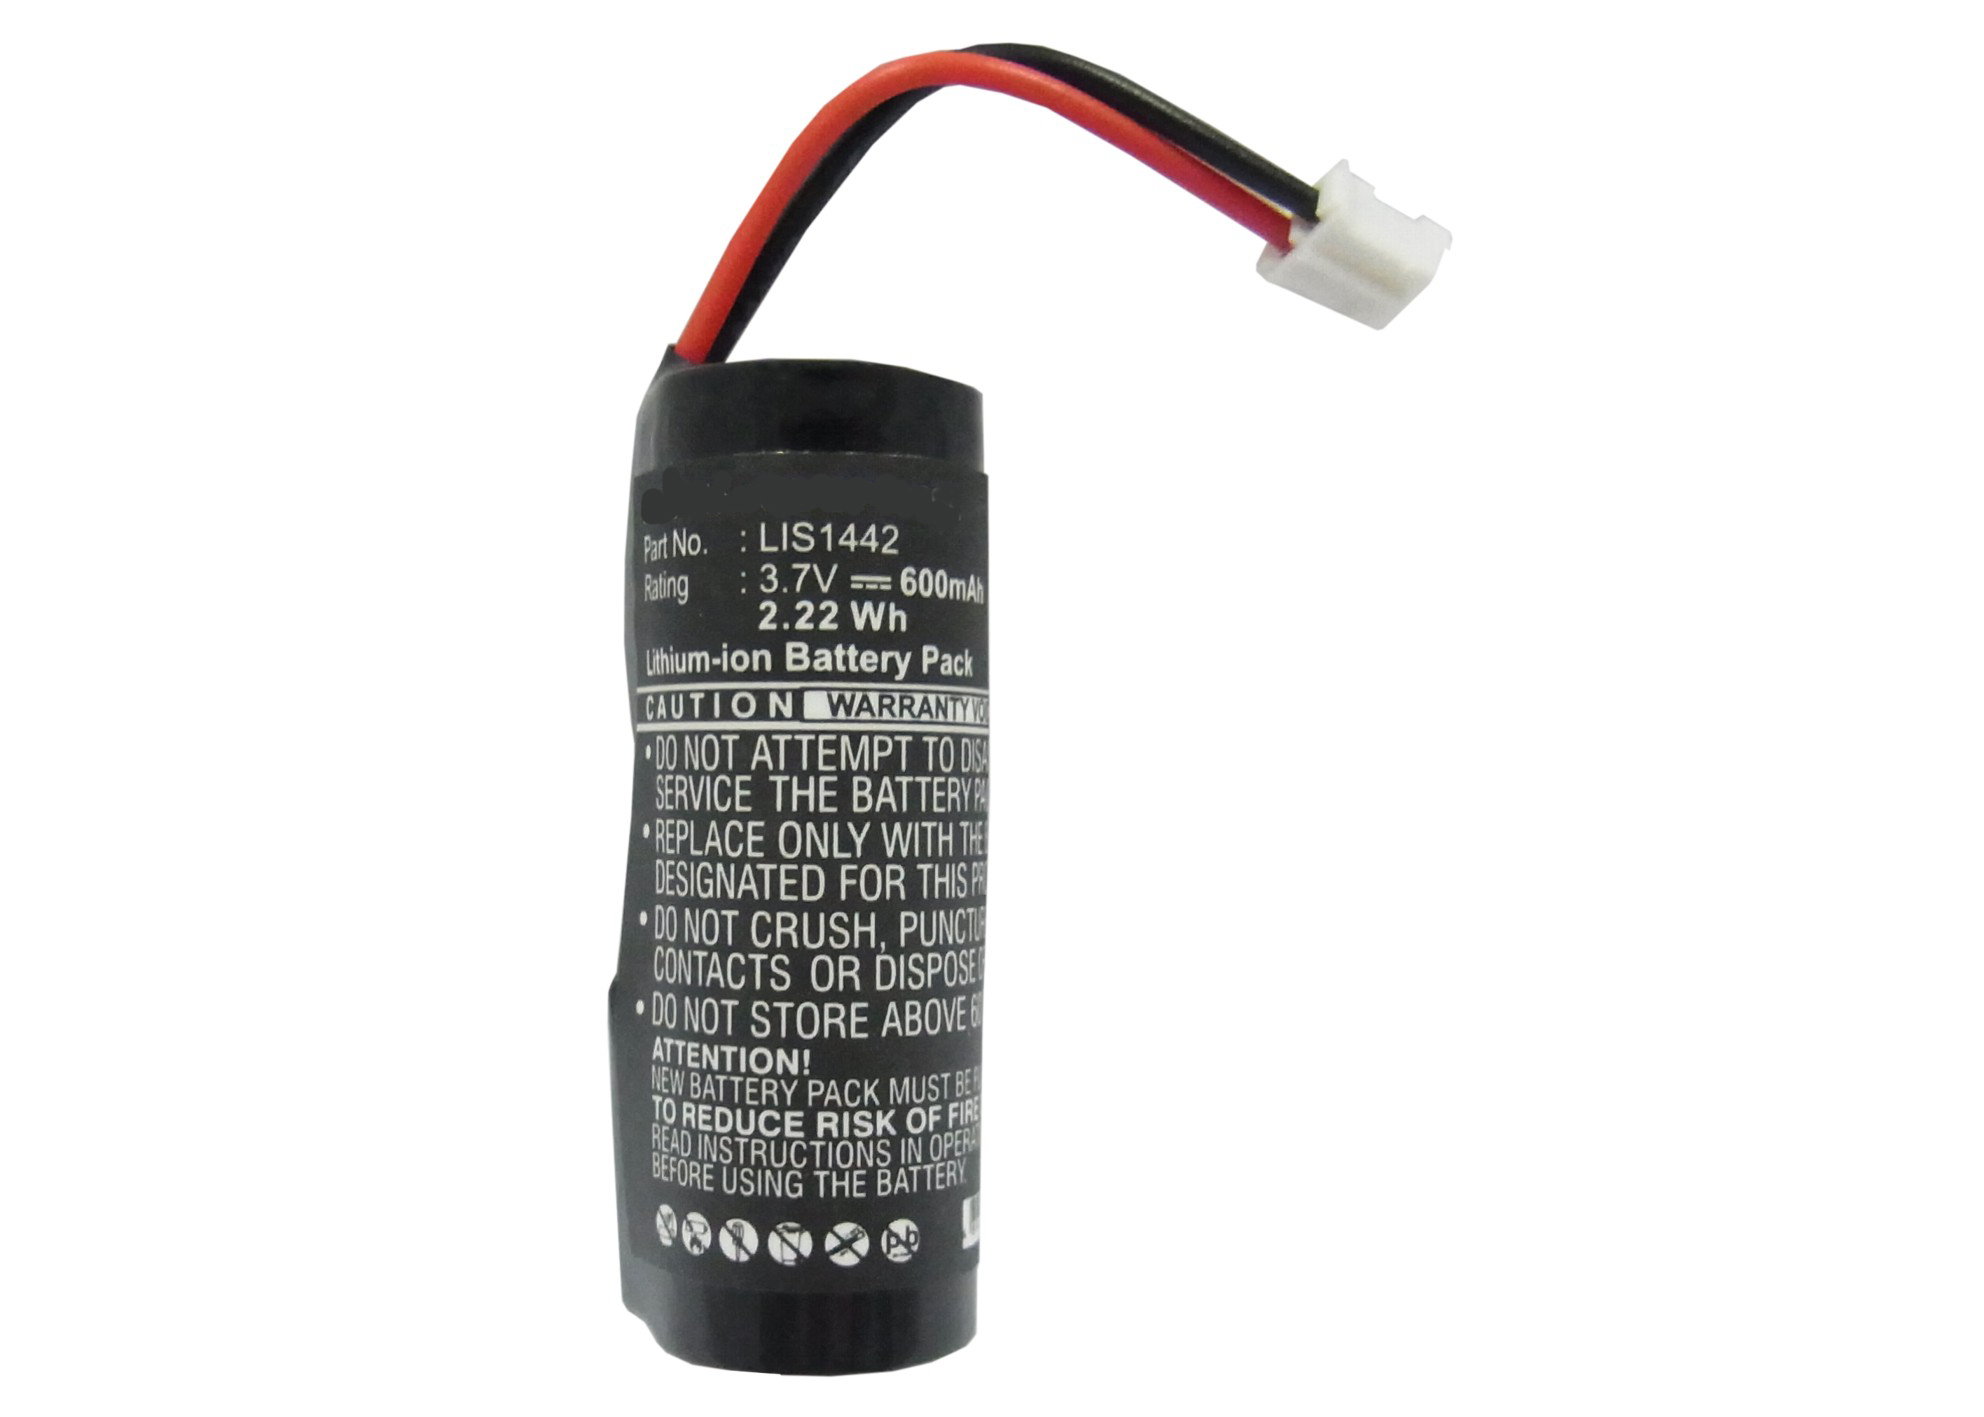 Batteries for SonyReplacement